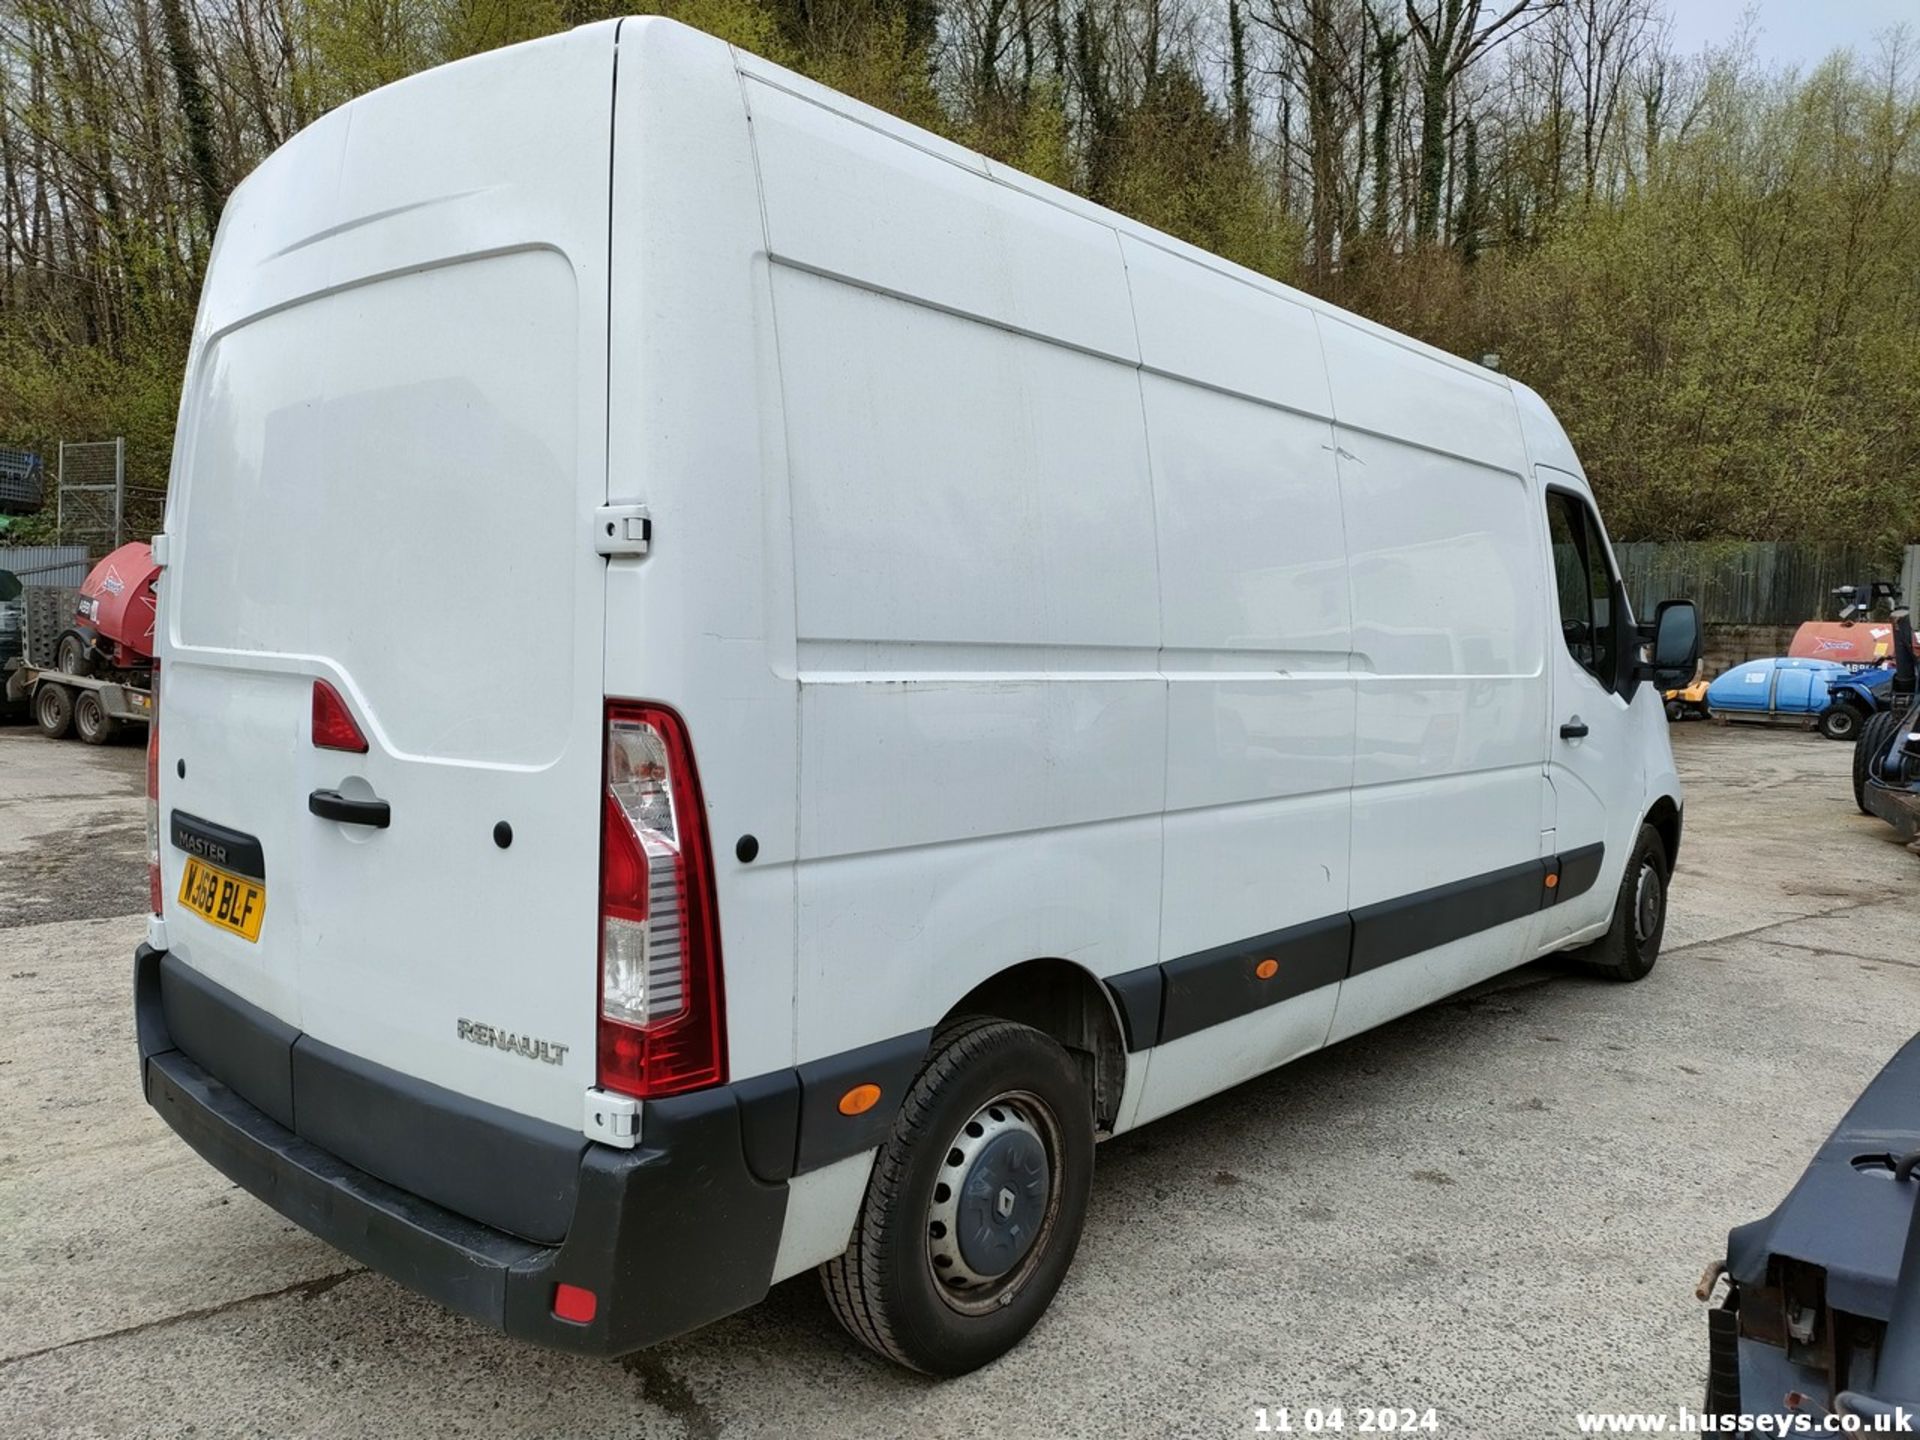 18/68 RENAULT MASTER LM35 BUSINESS DCI - 2298cc 5dr Van (White) - Image 44 of 68